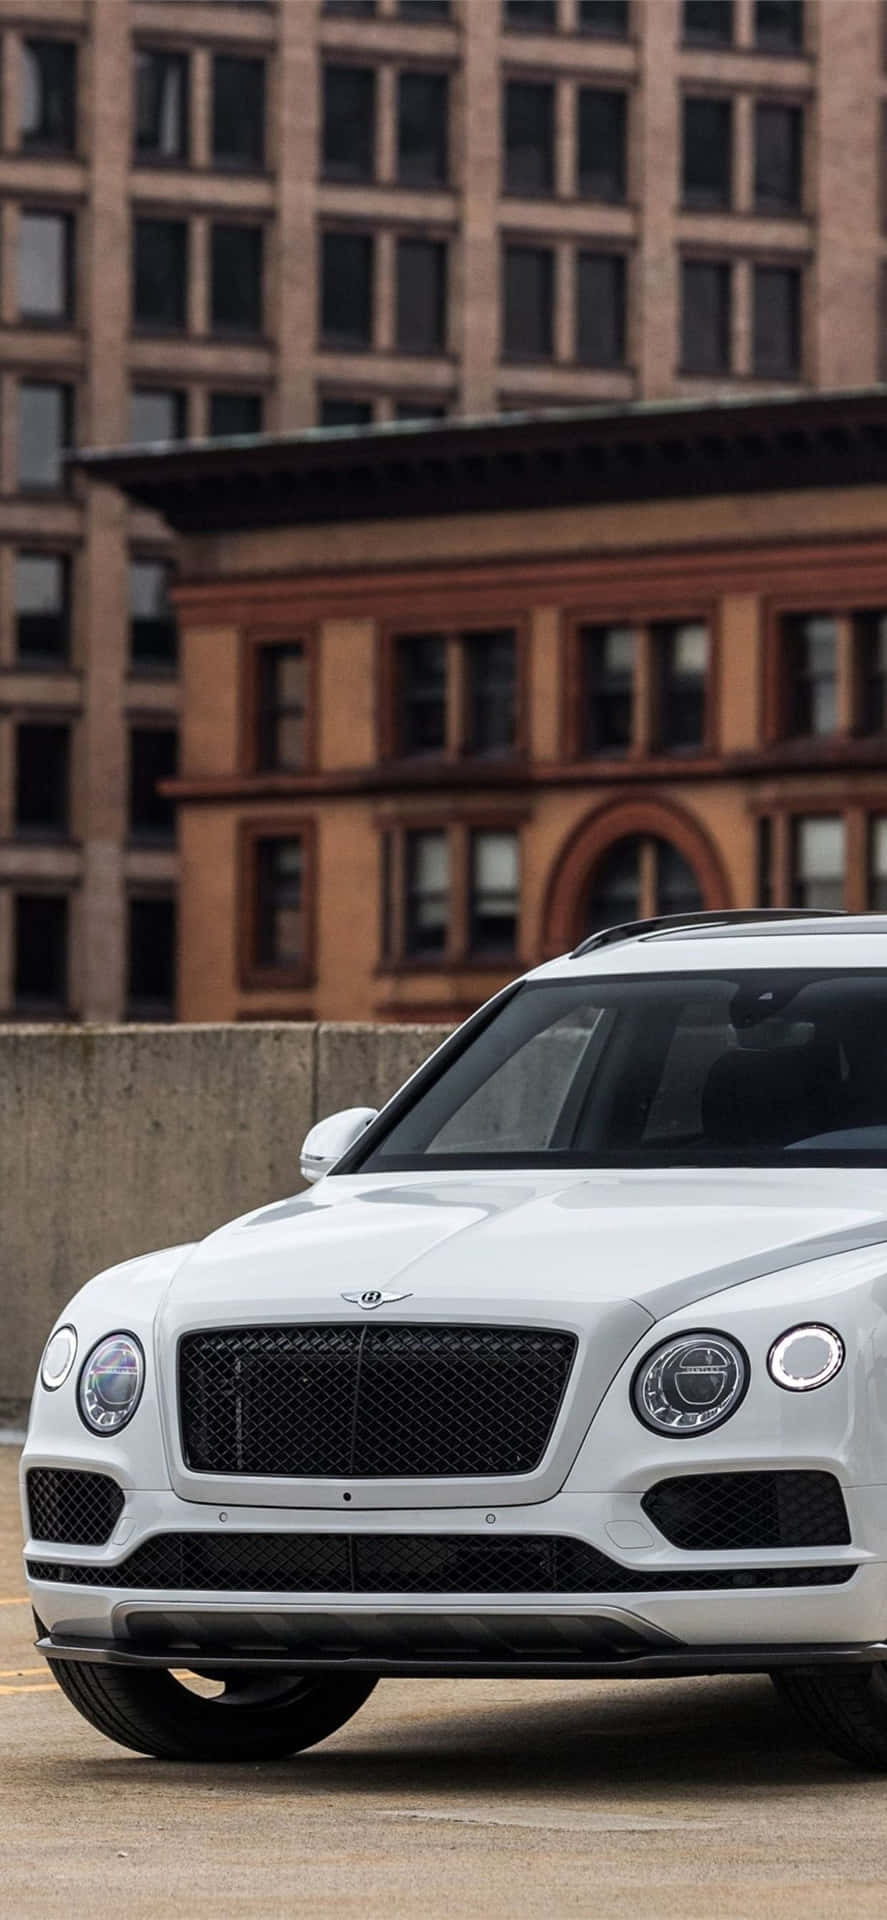 The Luxury of the Iphone Xs Max Meets the Luxury of Bentley